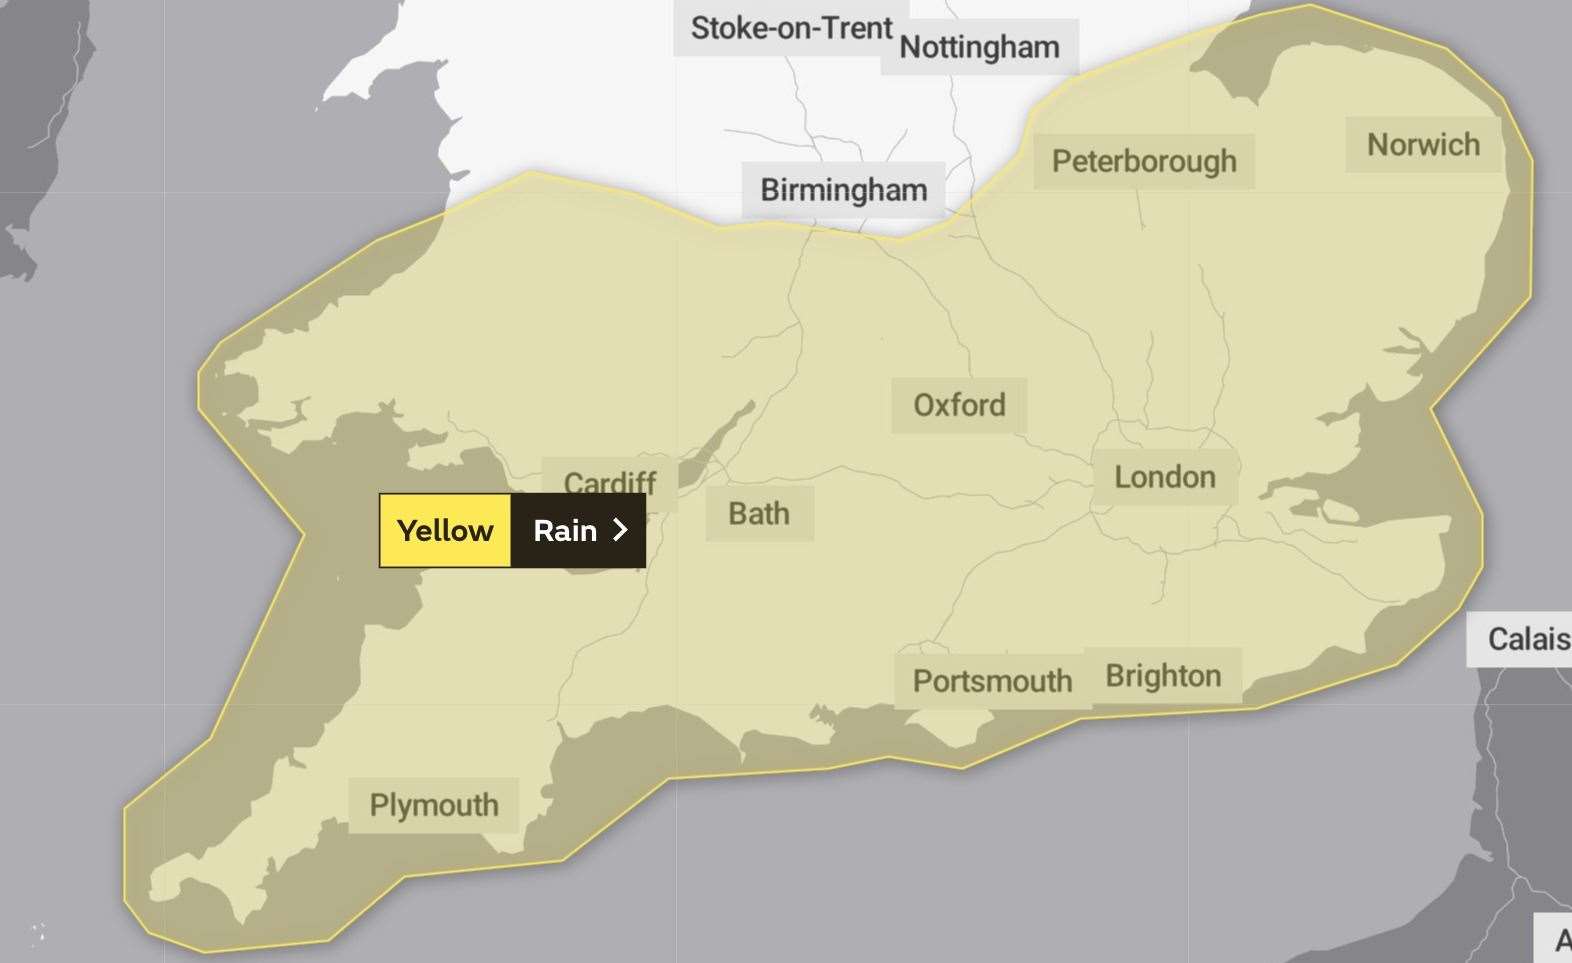 The Met Office has issued a yellow weather warning for heavy rain across the south.